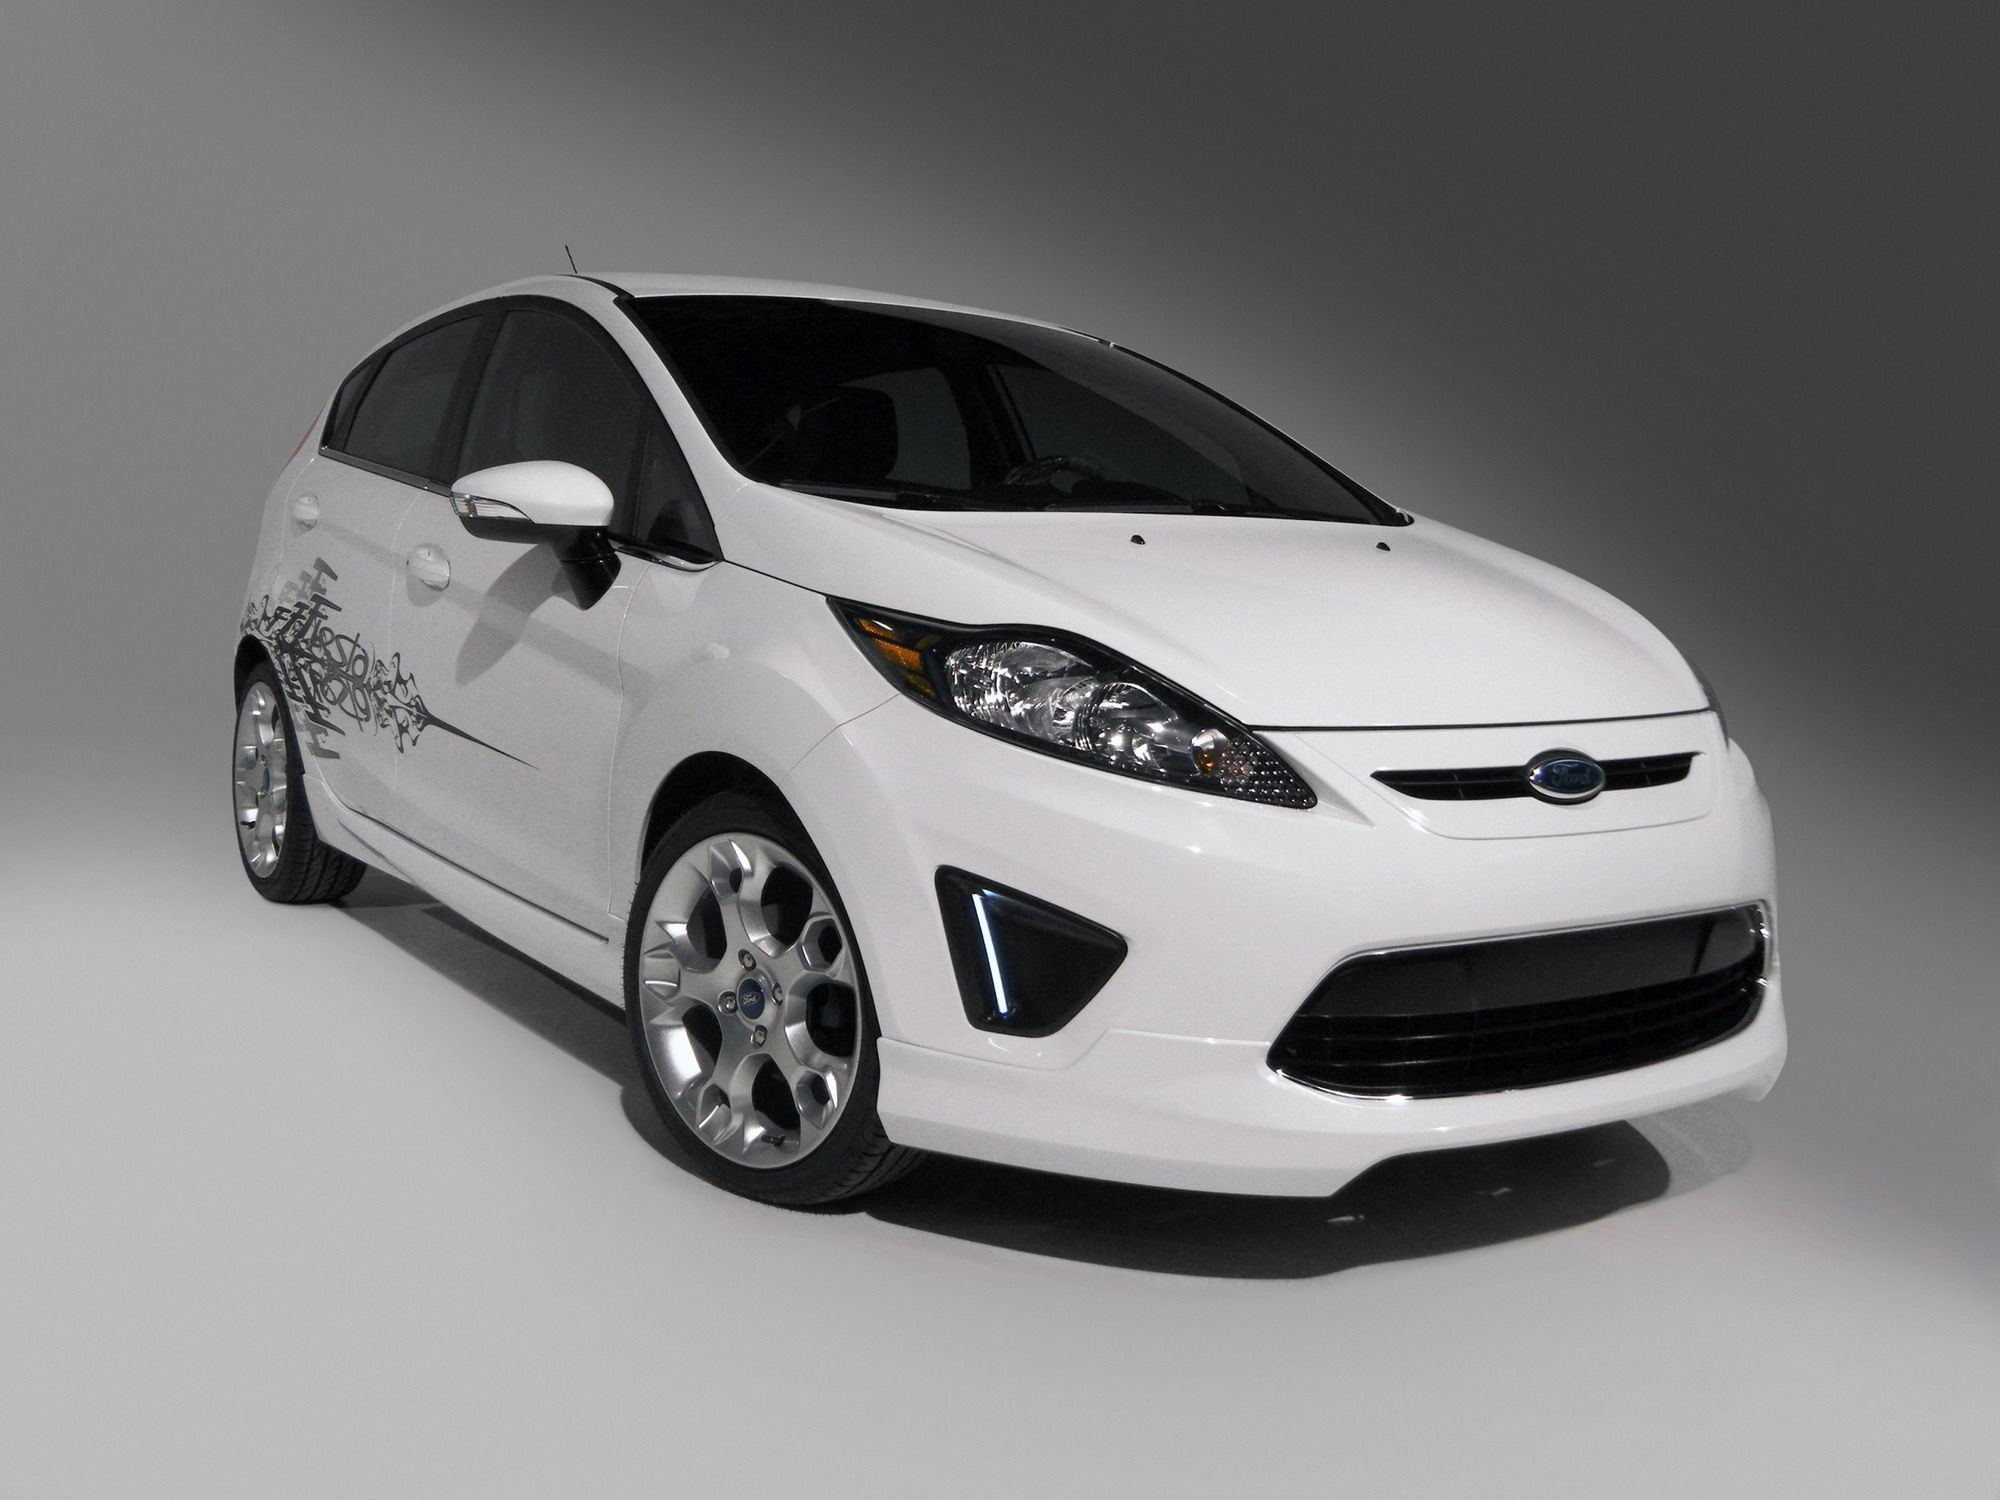 2009 Ford Fiesta by Ford Custom Accessories